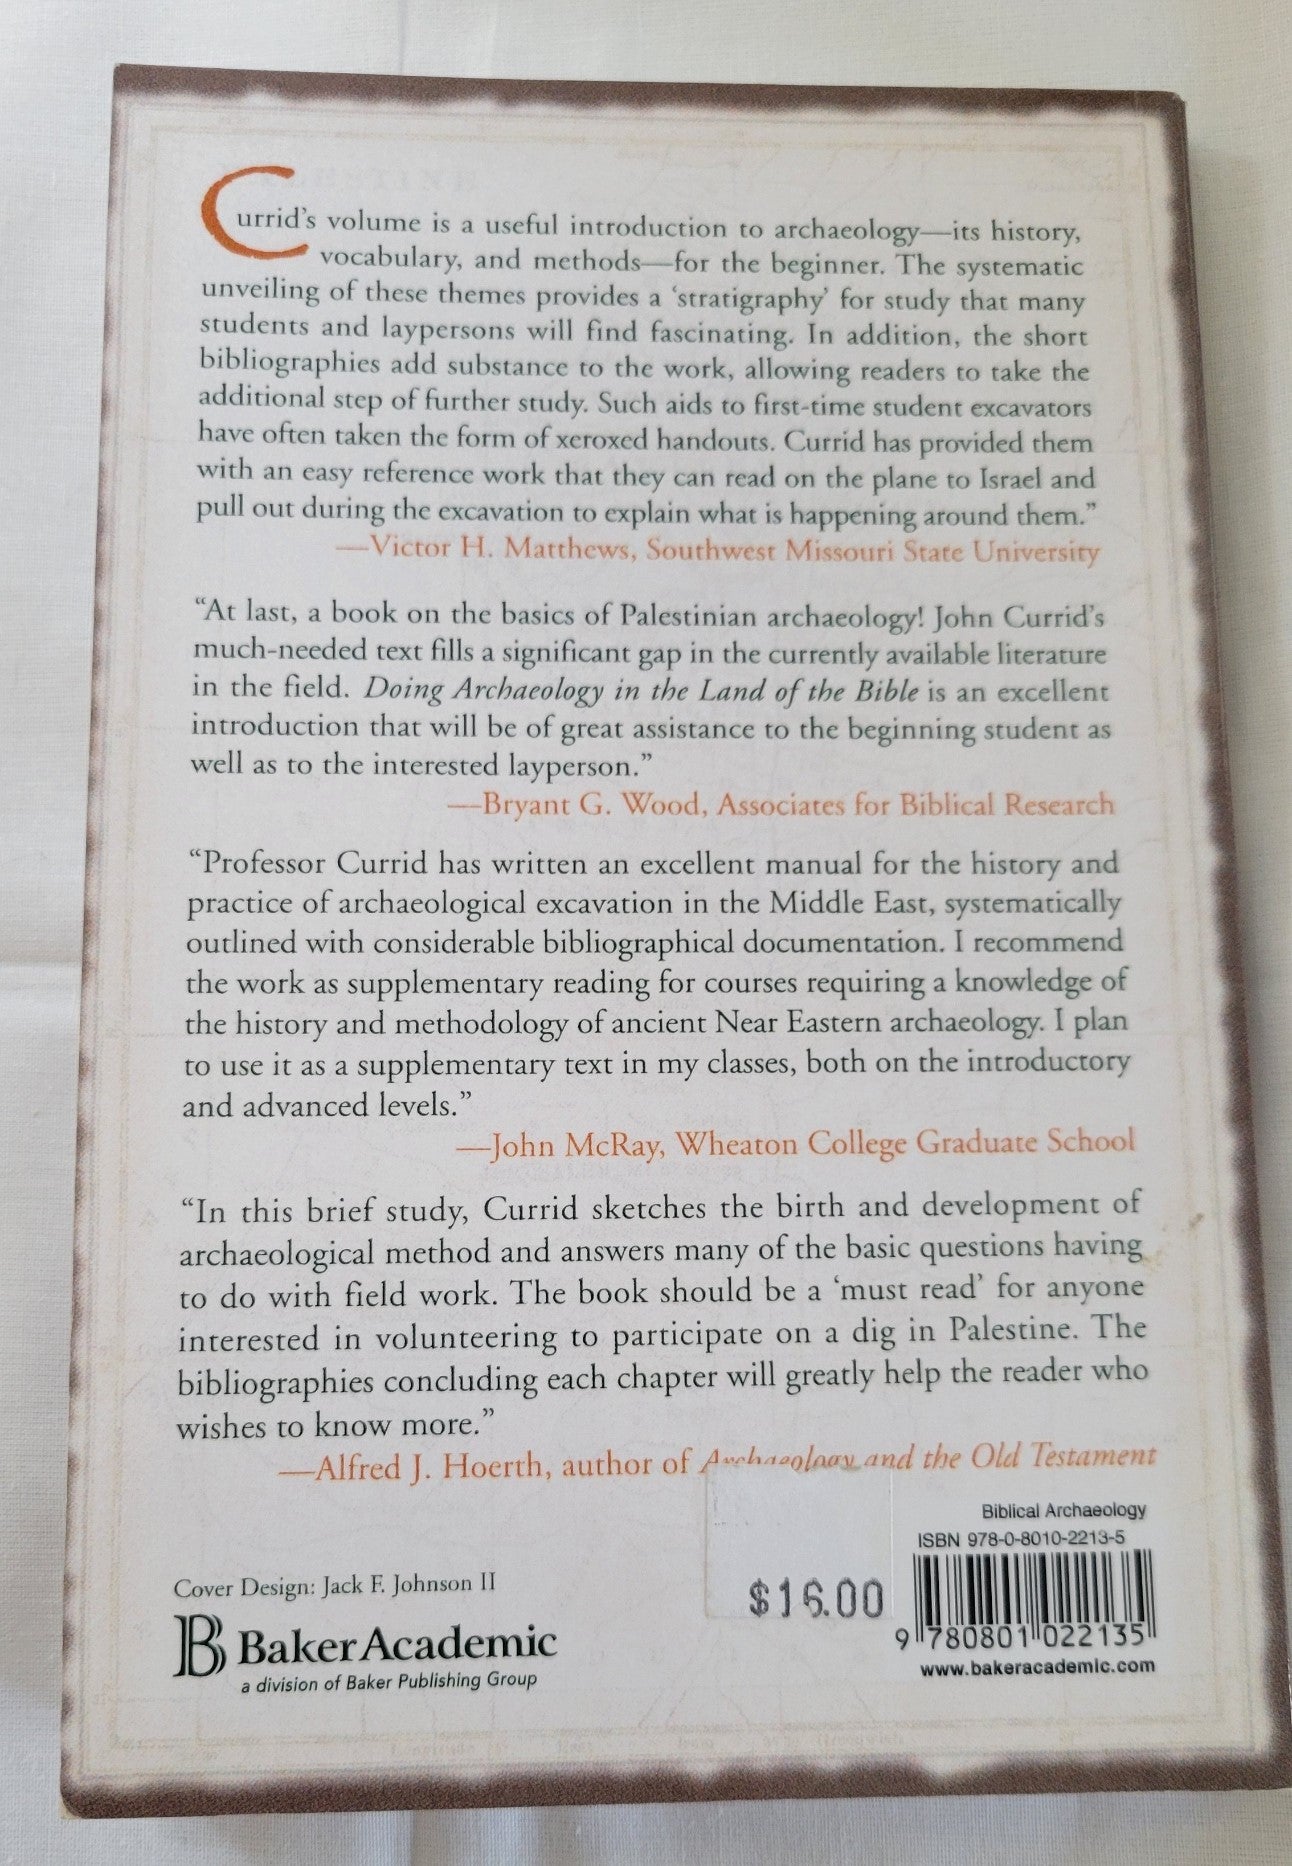 Used book “Doing Archaeology in the Land of the Bible: A Basic Guide” Written by John D. Currid. "A popular introduction to archaeology and the methods archaeologists use to reconstruct the history of ancient Israel." View of back cover.